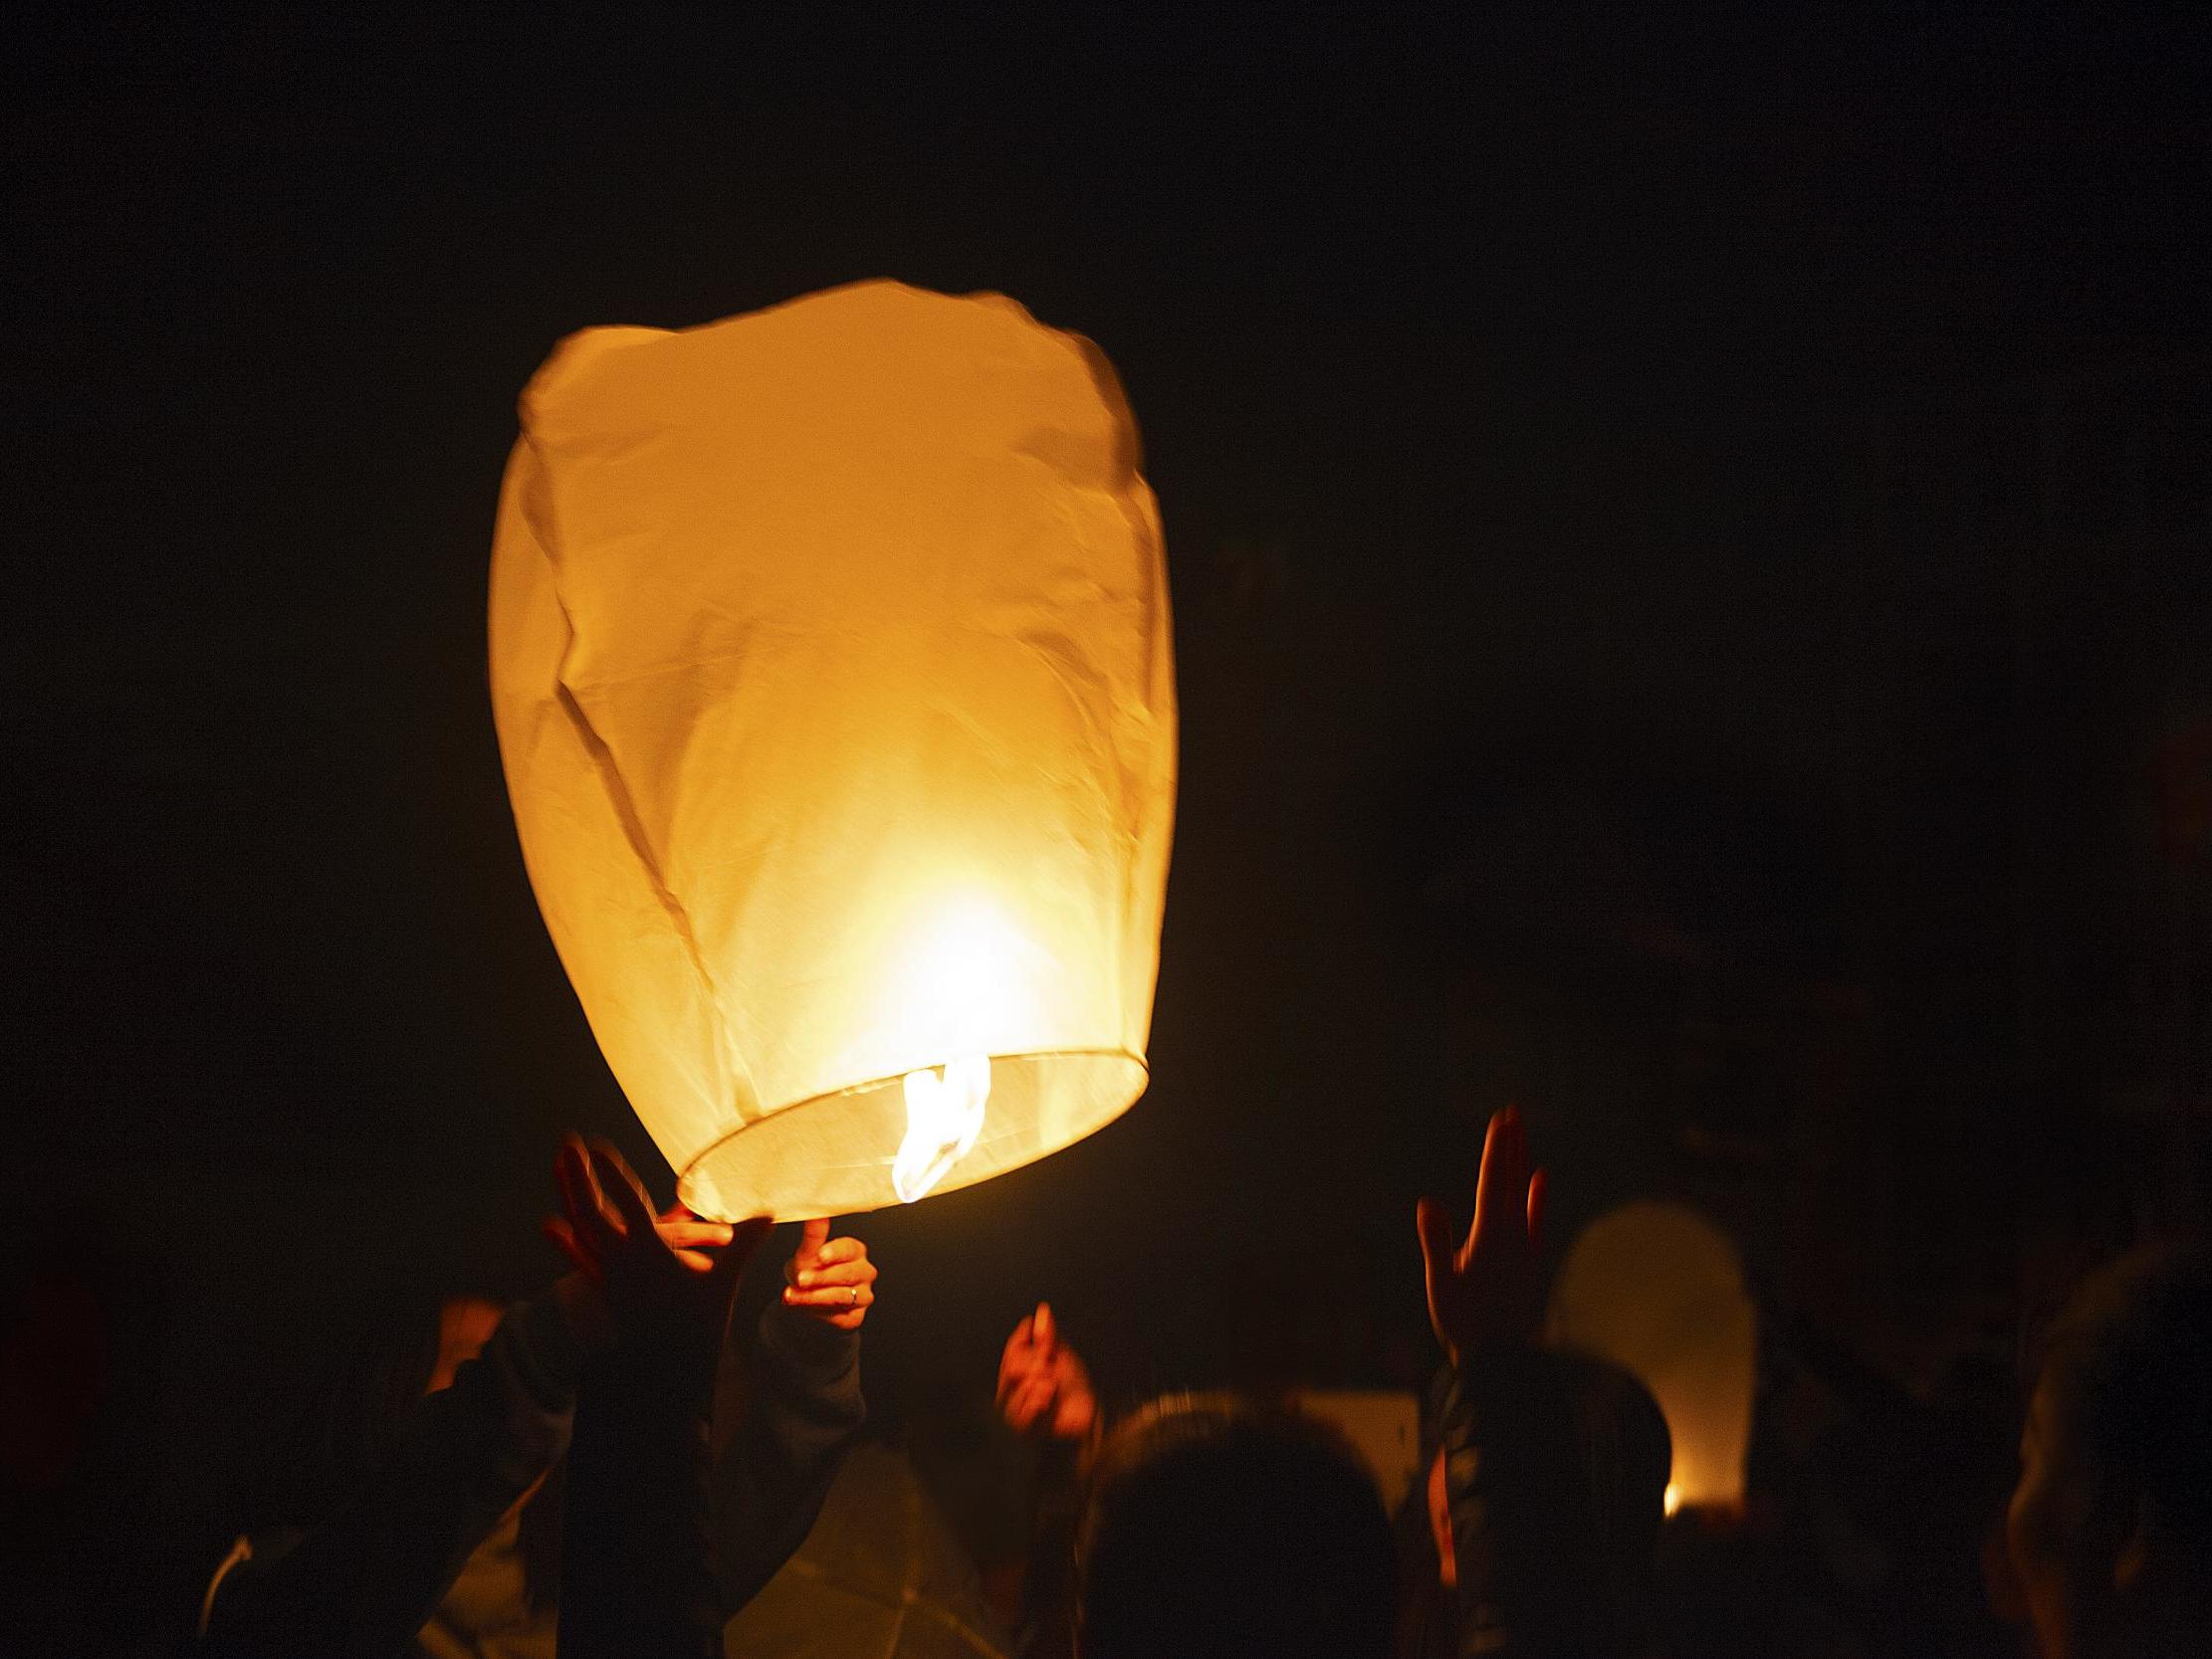 Lanterns can start fires and injure animals when they land, say critics